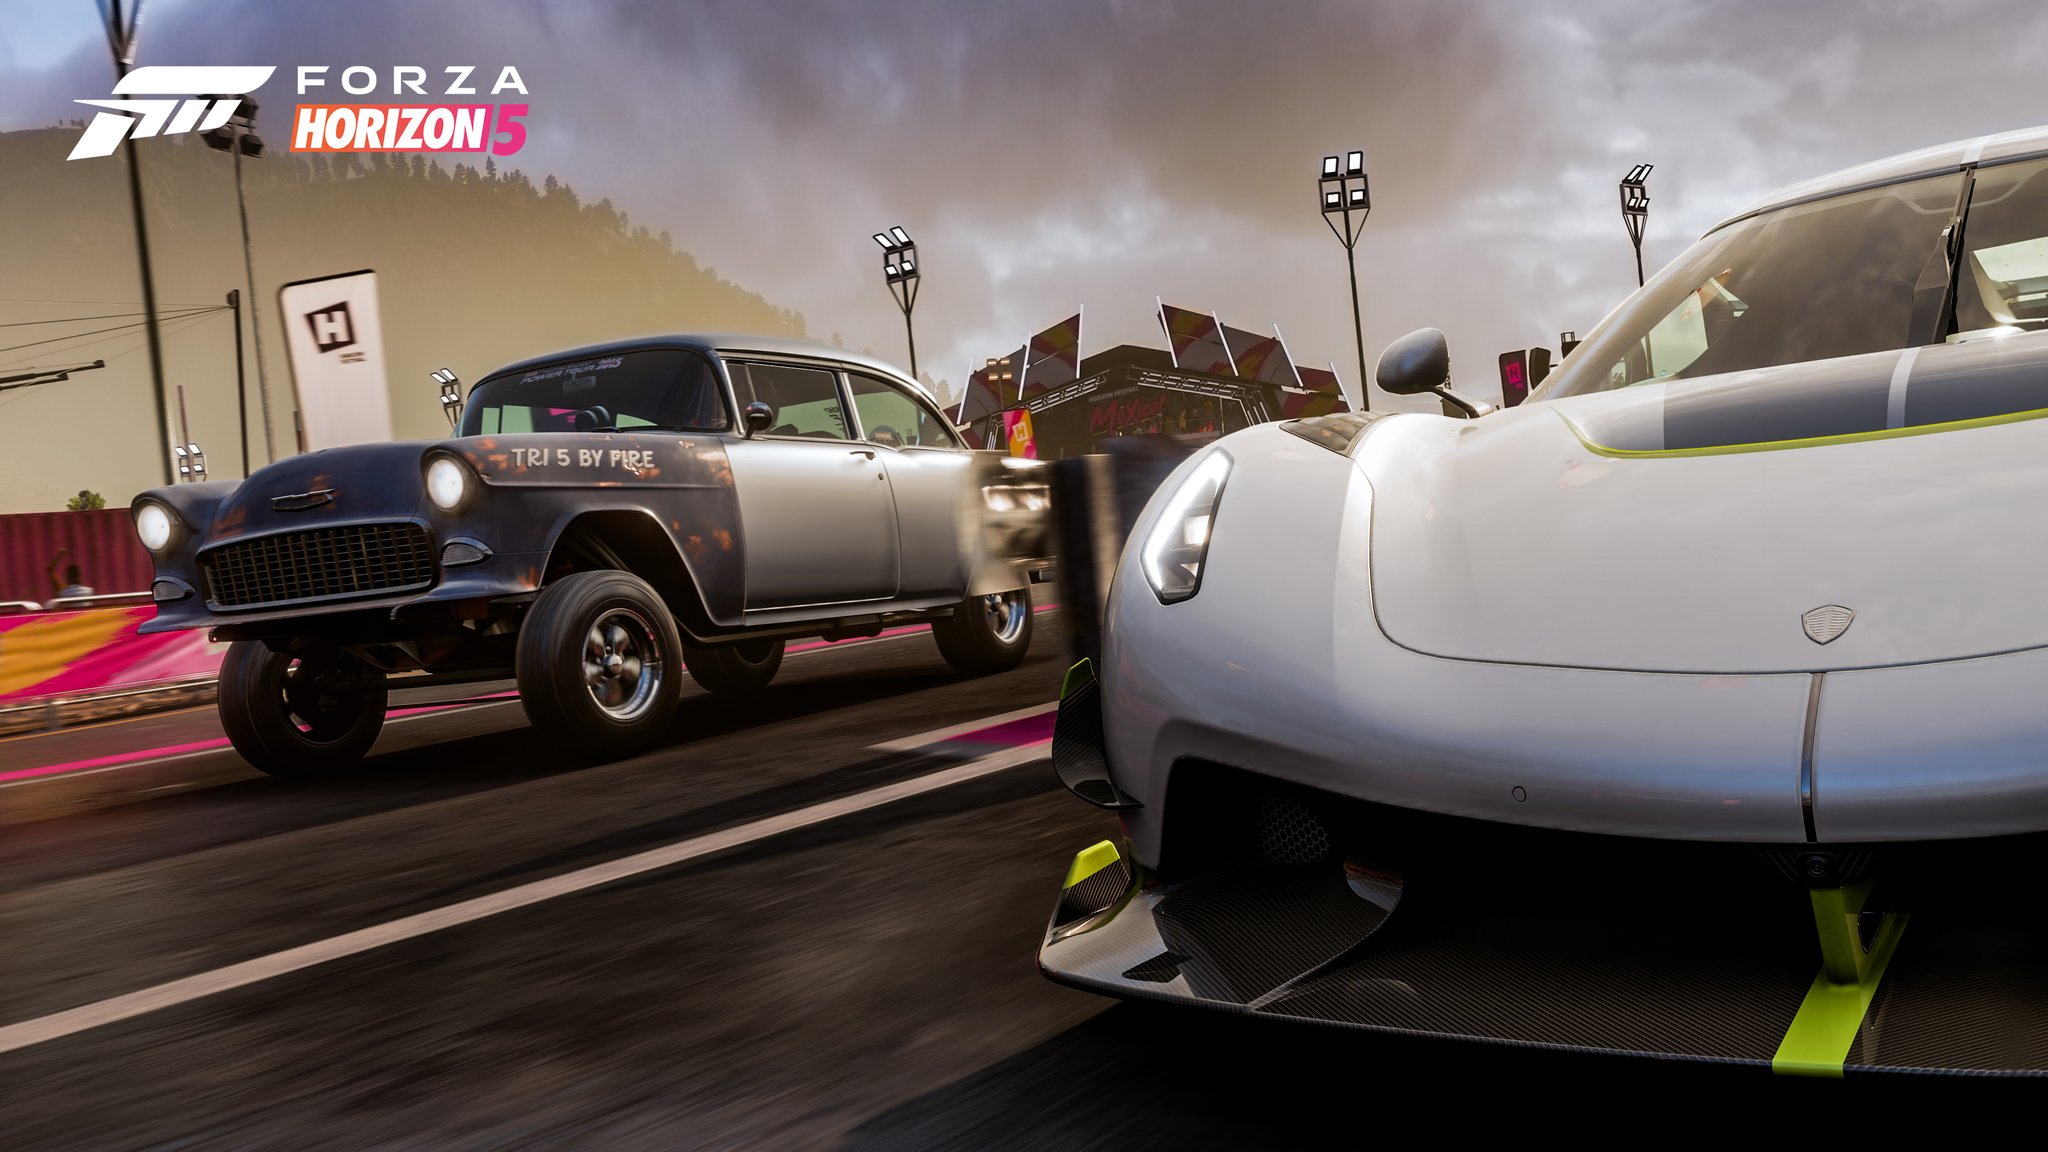 Here's how to tune and refine your cars in Forza Horizon 5